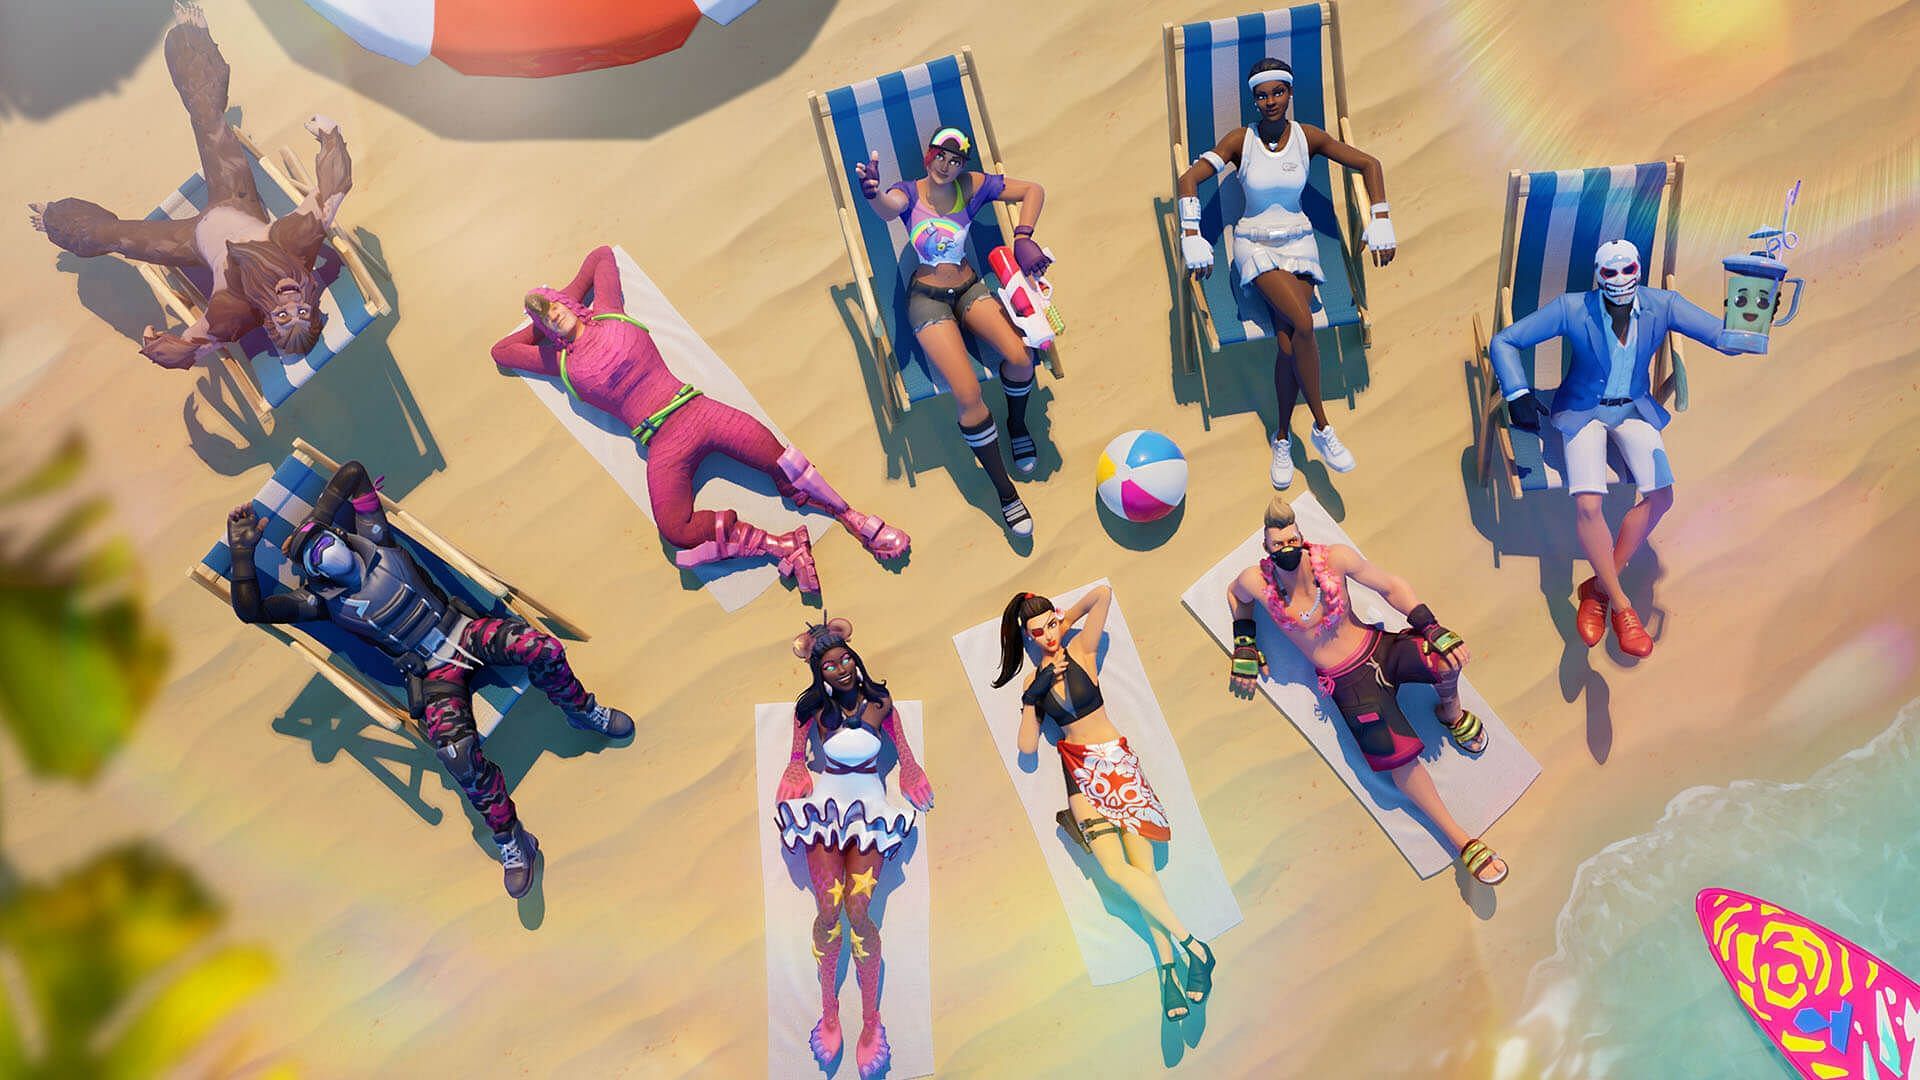 The previous summer events in Fortnite were extremely fun (Image via Epic Games)